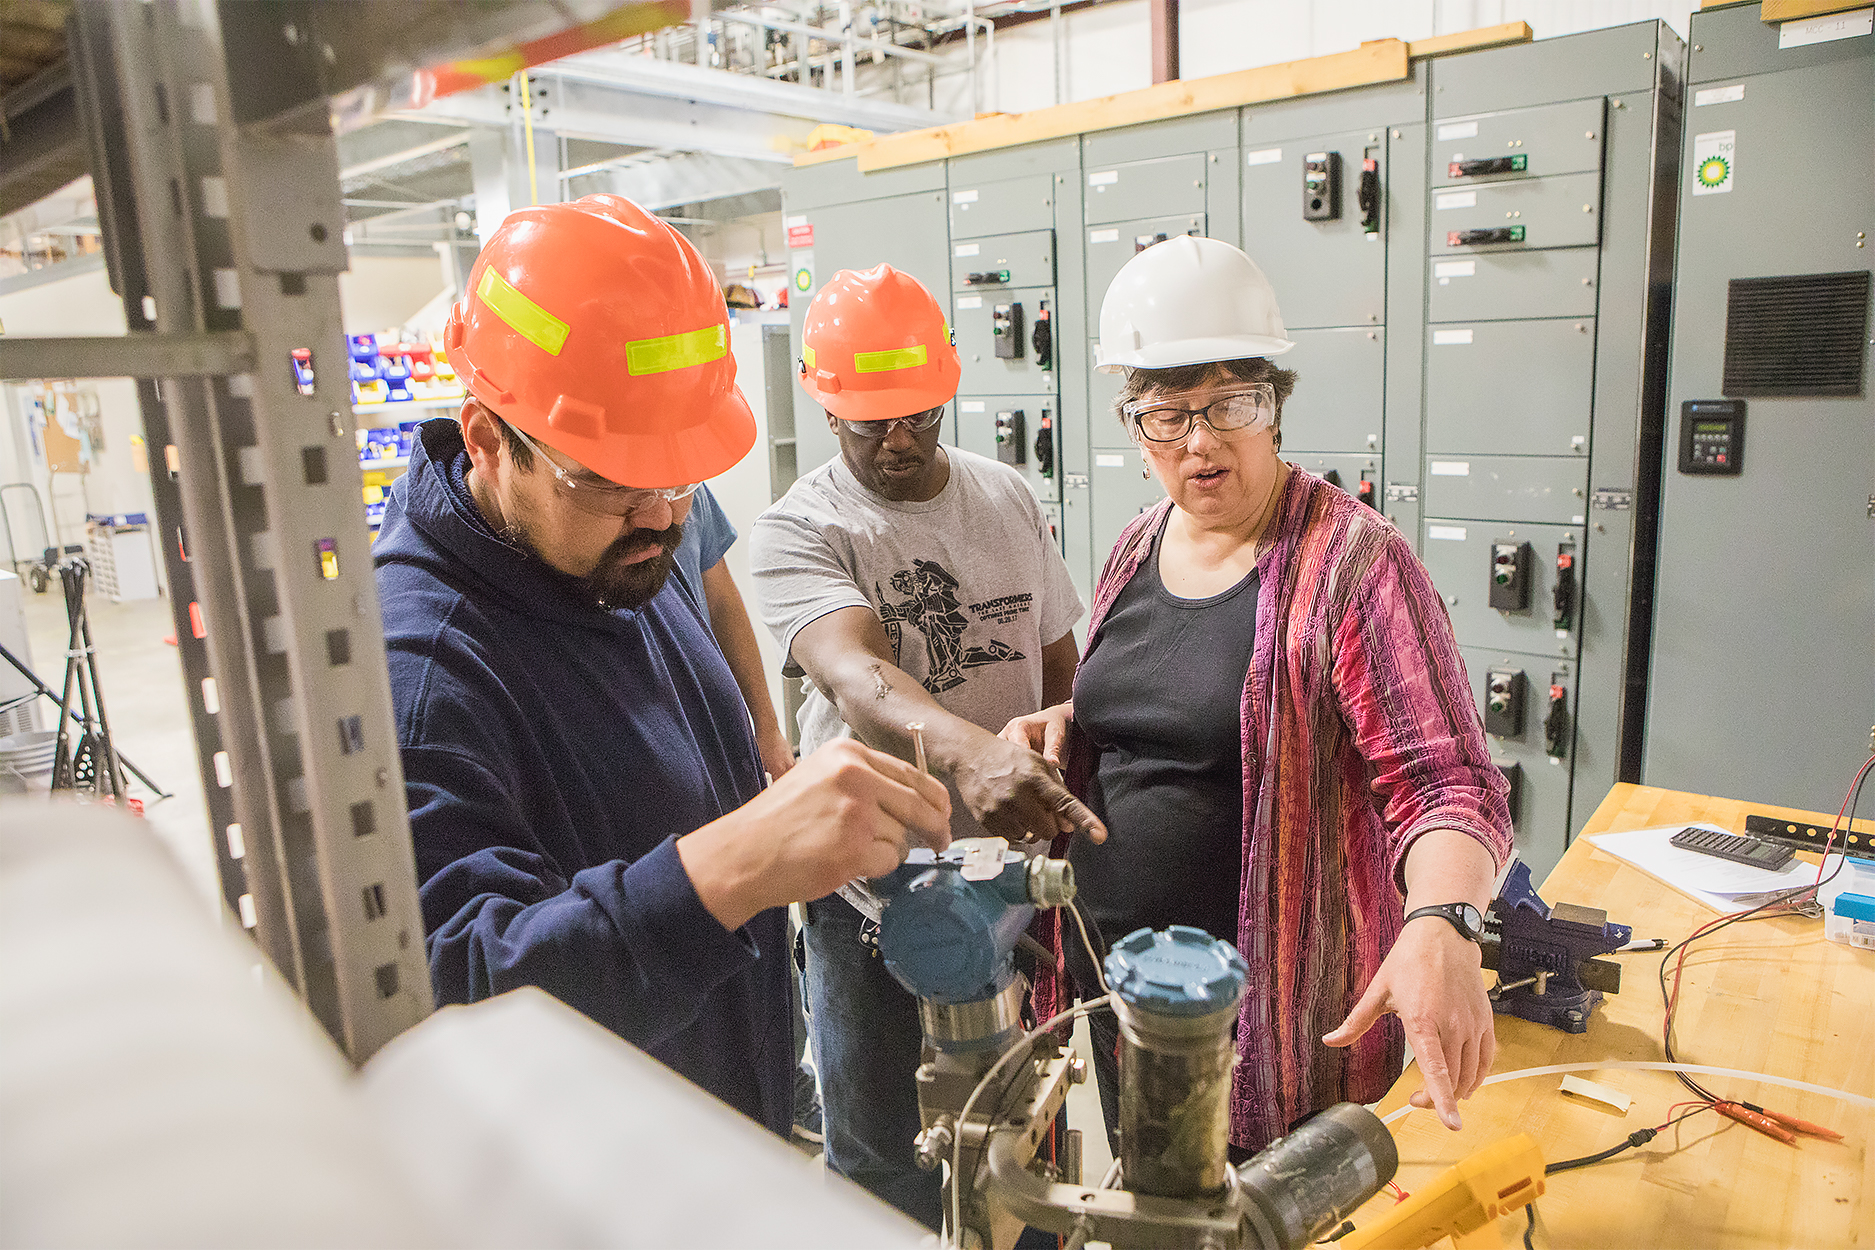 Students Glen Morgan, left, and Ernest Holt, center, listen as Teresa Lantz, assistant professor of process technology, demonstrates how to use a bubbler to monitor water levels in a tank in July 2017. Morgan and Holt were participating in the UAF Community and Technical College’s mining mill operator training program at a facility leased from the Fairbanks Pipeline Training Center off Van Horn Road. UAF photo by JR Ancheta